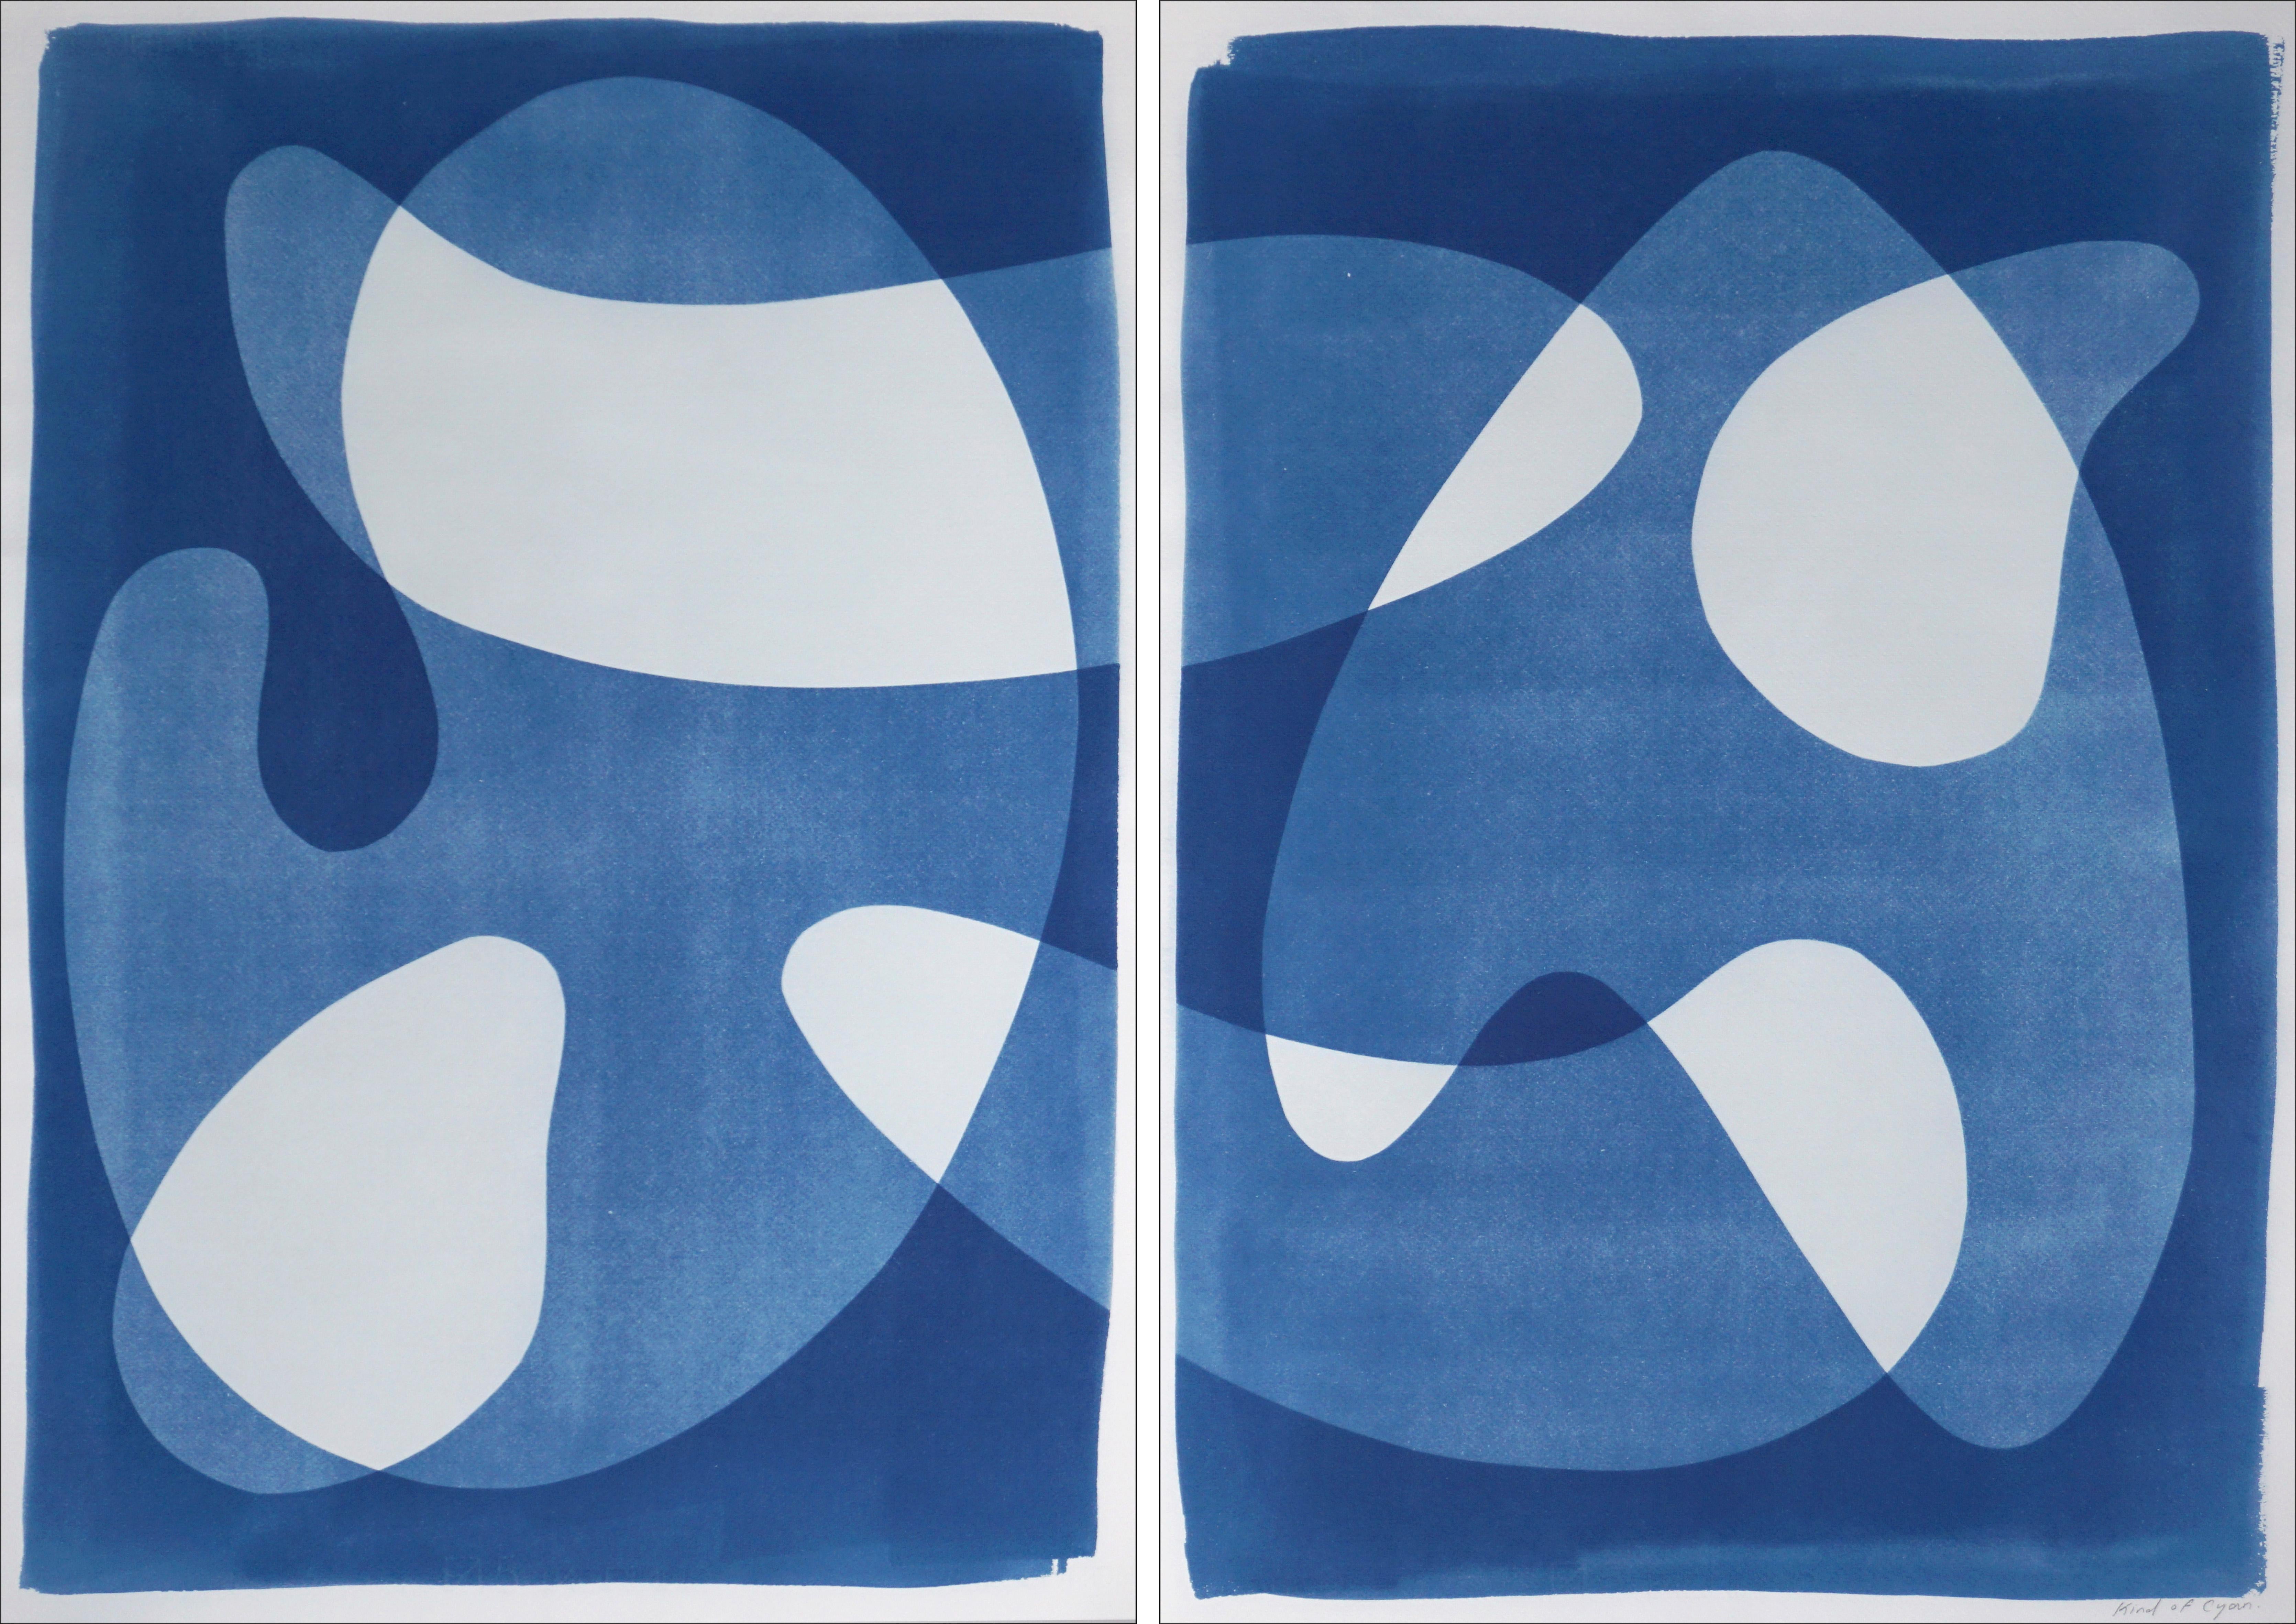 Kind of Cyan Abstract Print - Positive Versus Negative, Mid-Century Shapes Blue Tones Cyanotype Print Diptych